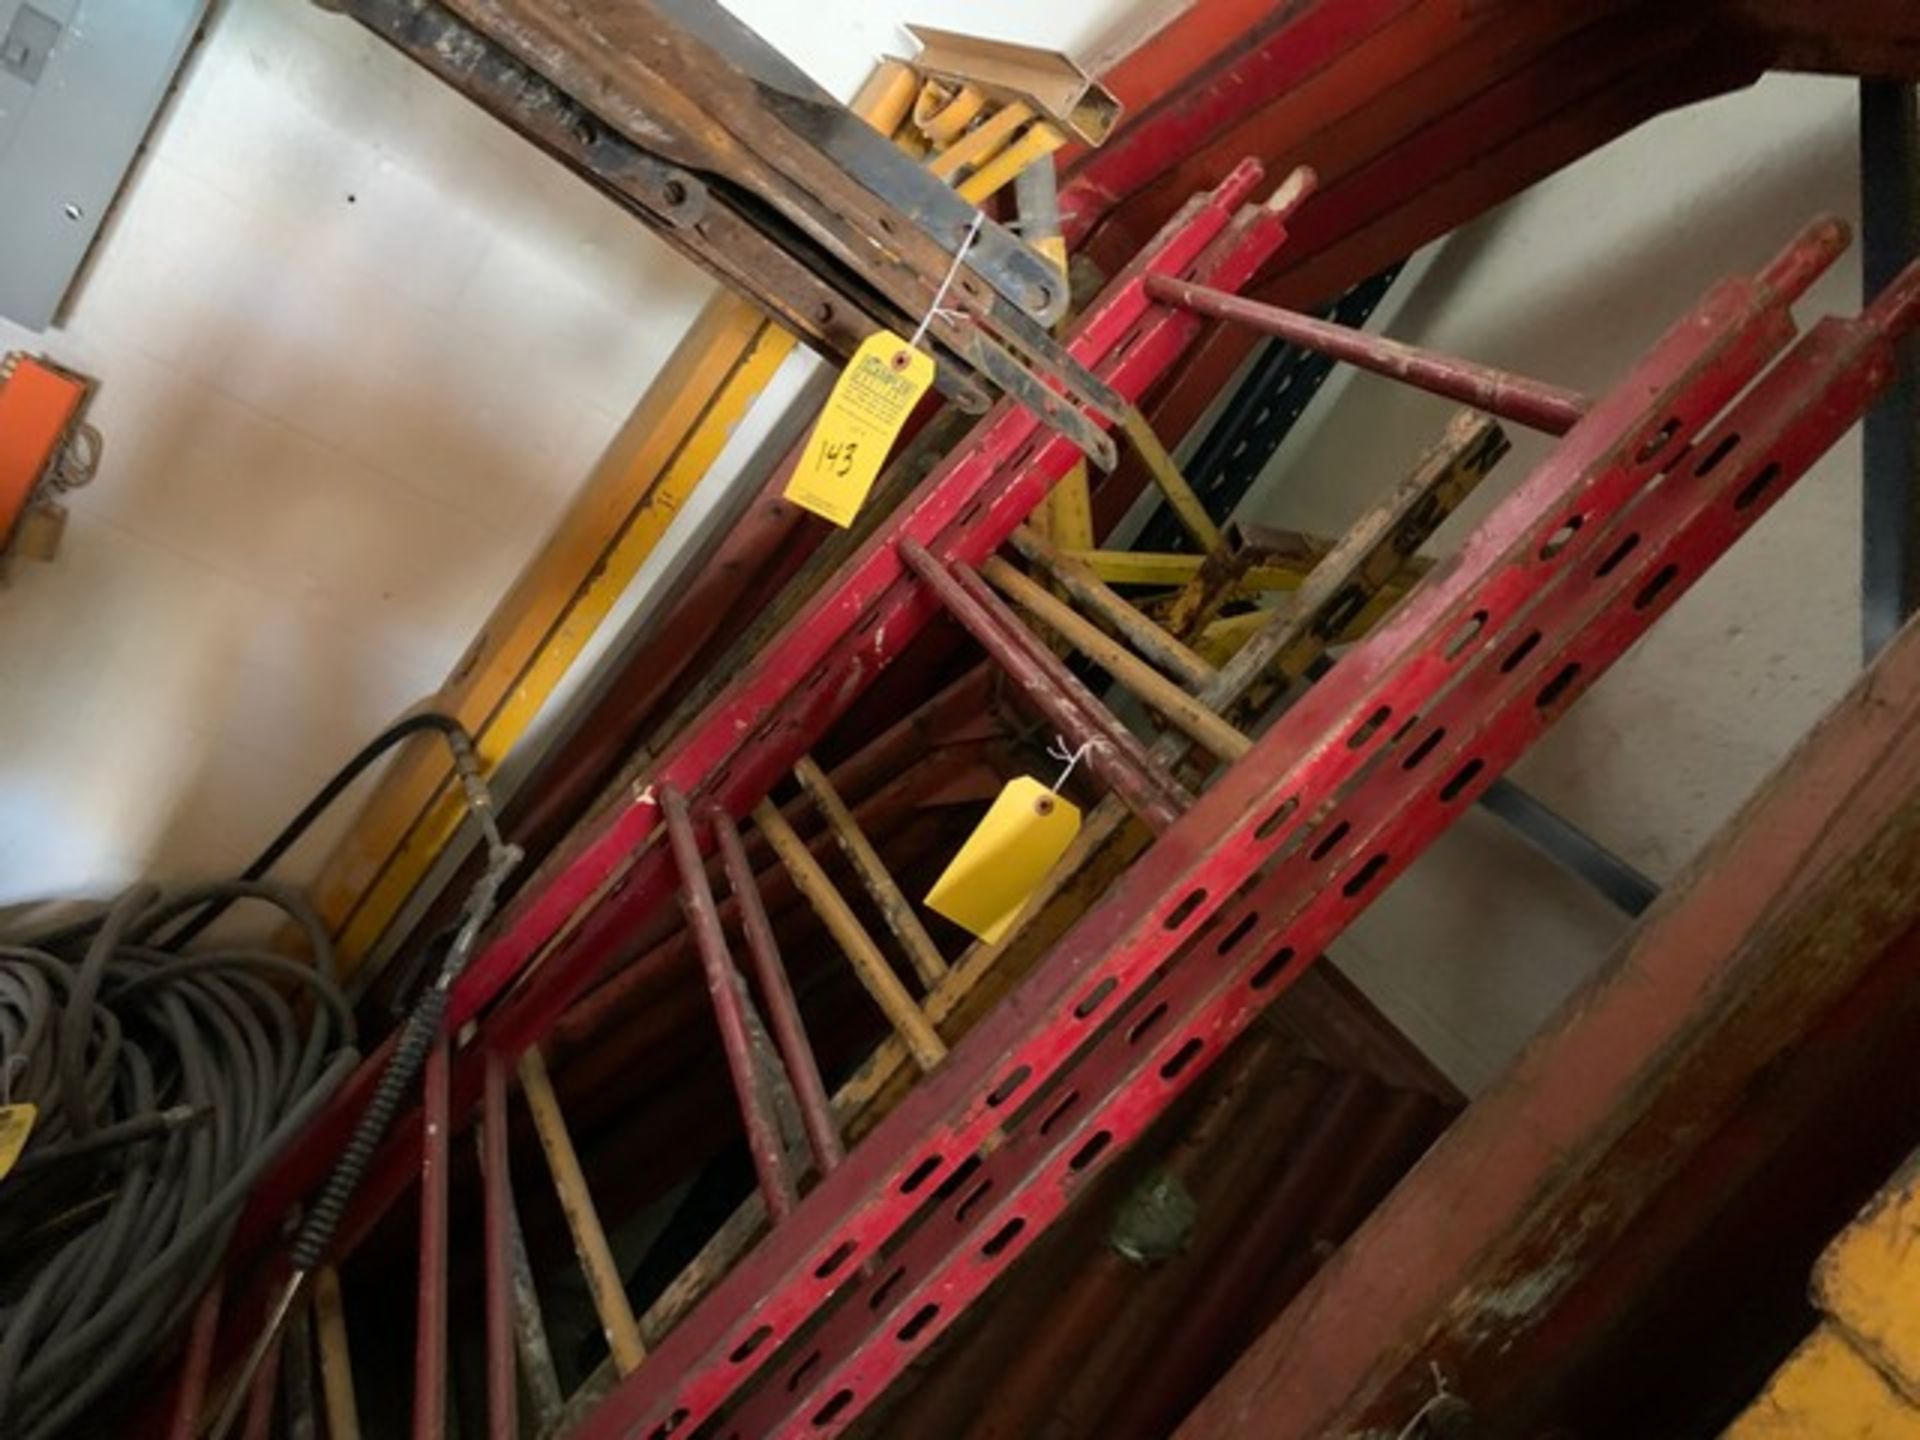 PIECES - 2- RED SCAFFOLDING BRACKETS / 2- YELLOW SCAFFOLDING BRACKETS / 2- YELLOW TRIPOD STANDS